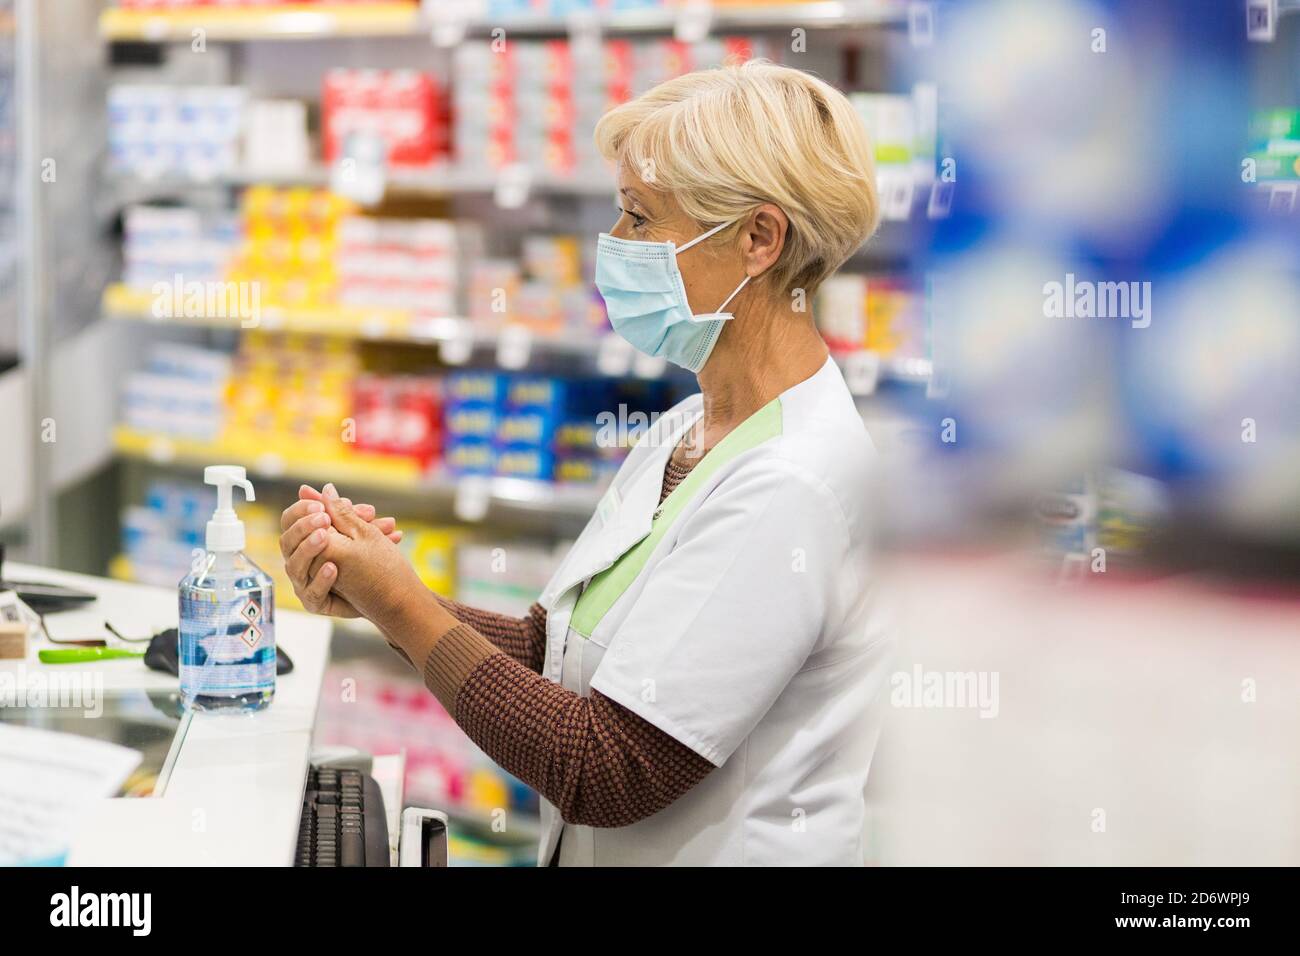 Pharmacist using hydroalcoholic gel during the Covid-19 pandemic, France. Stock Photo